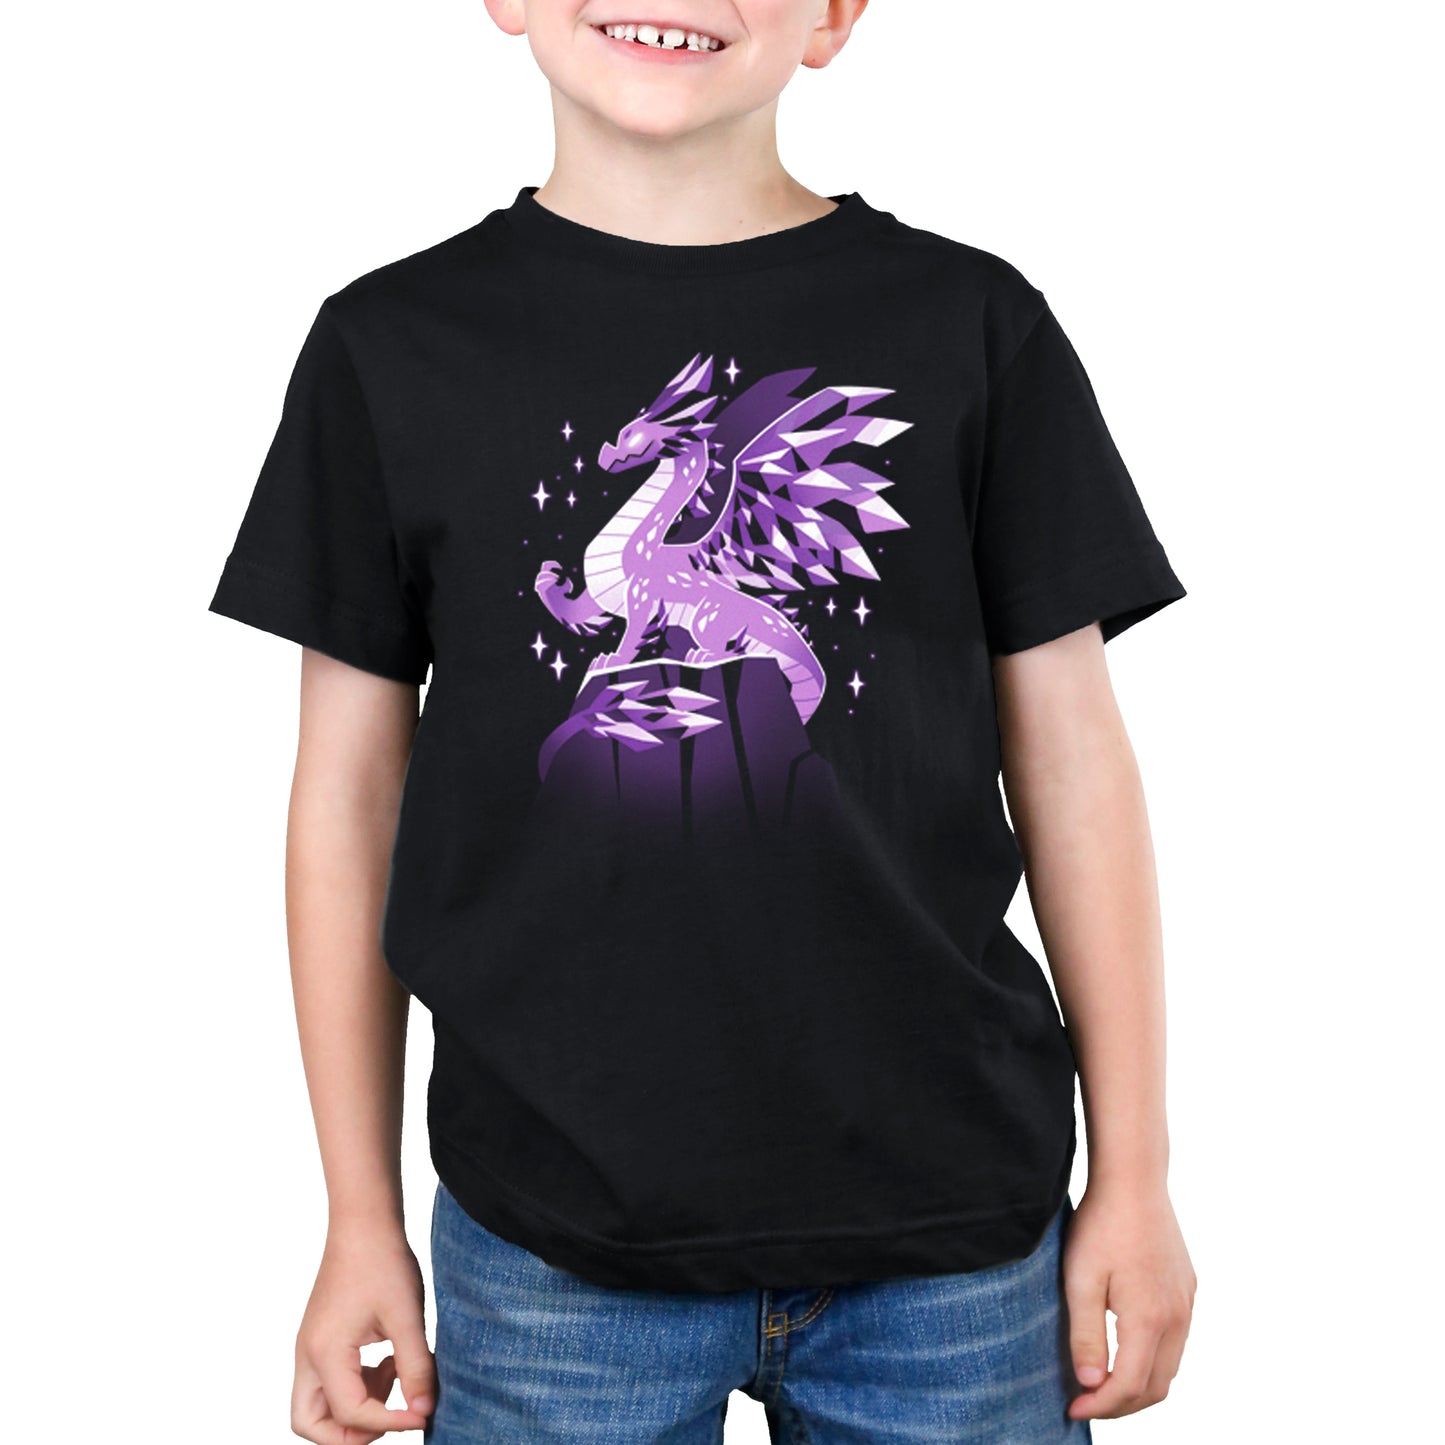 A young boy wearing a black t-shirt with a TeeTurtle Crystal Dragon on it and holding crystals.